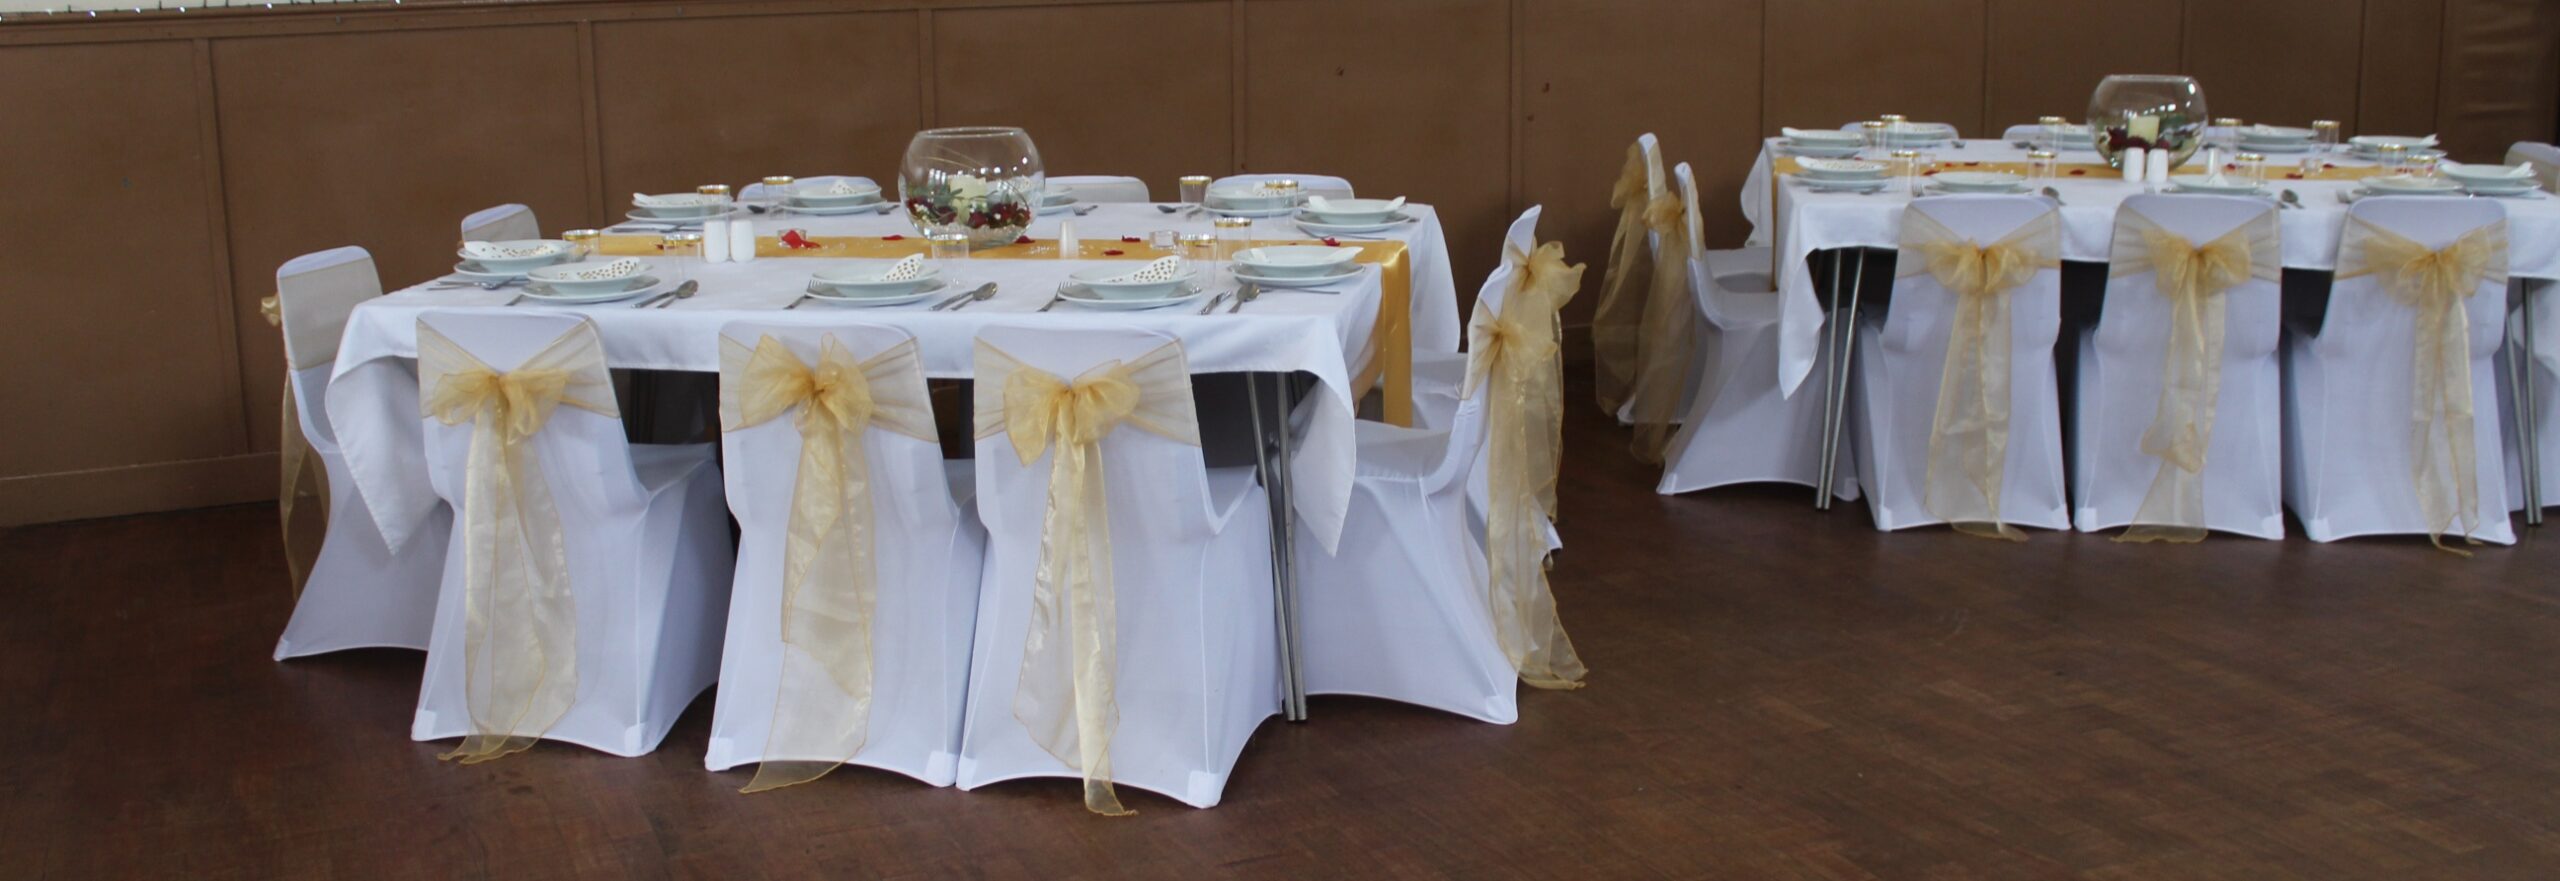 White wedding tables and chairs with gold sashes